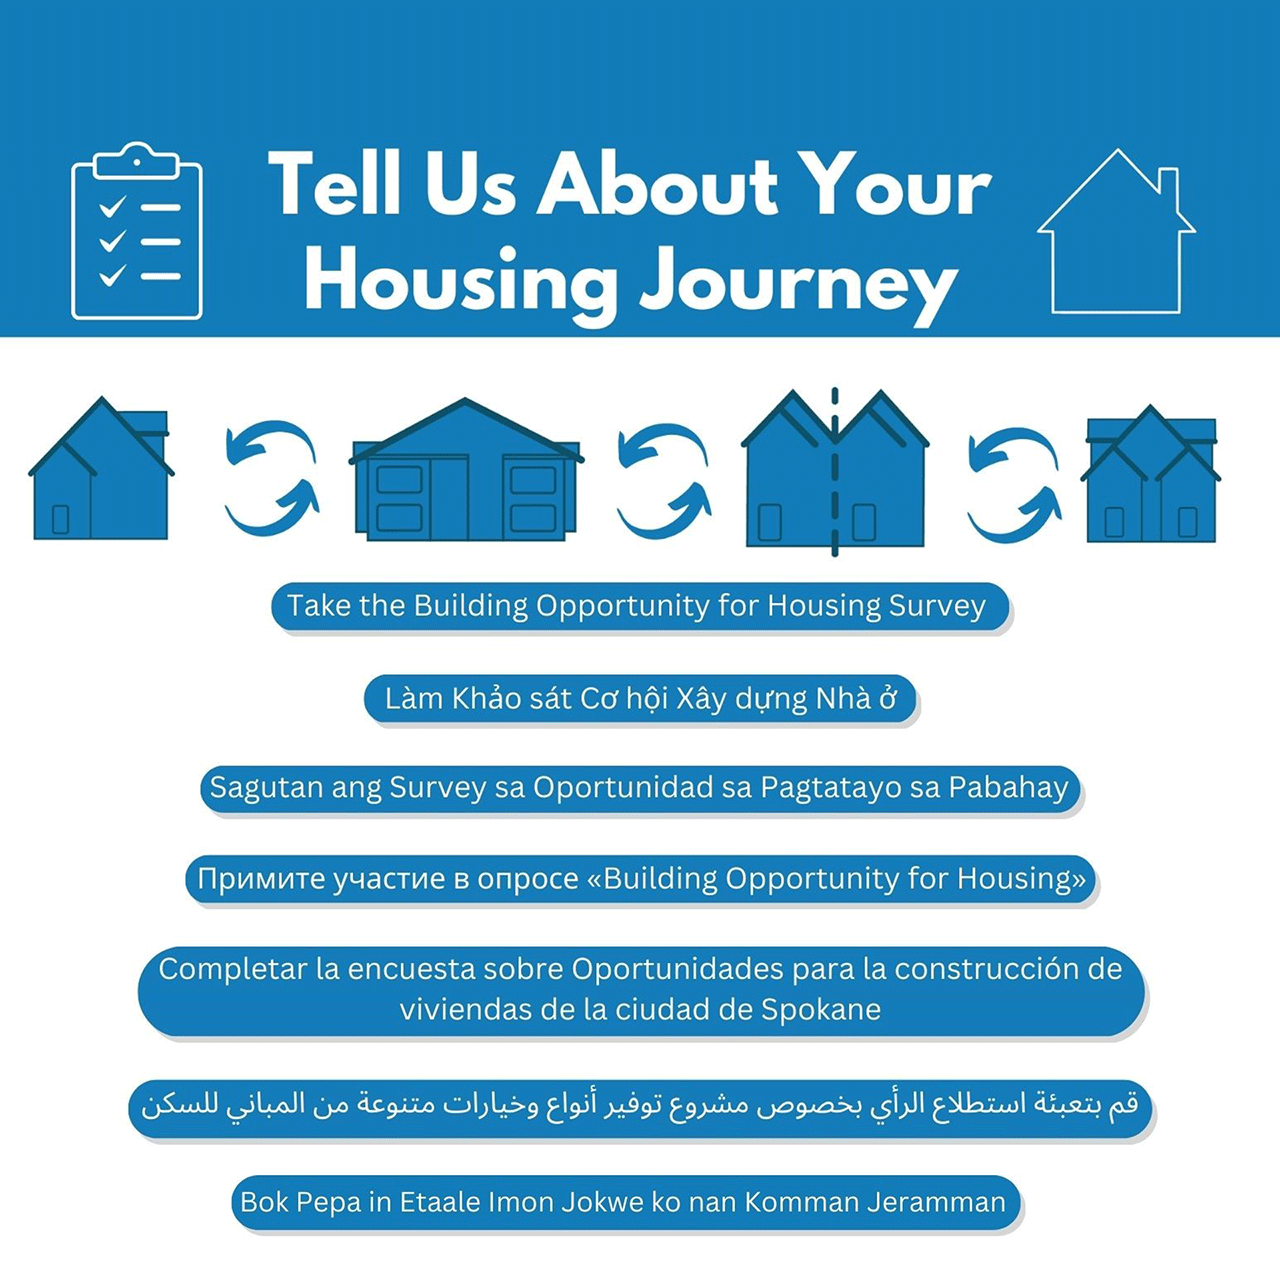 Take the Building Opportunity for Housing Survey Button